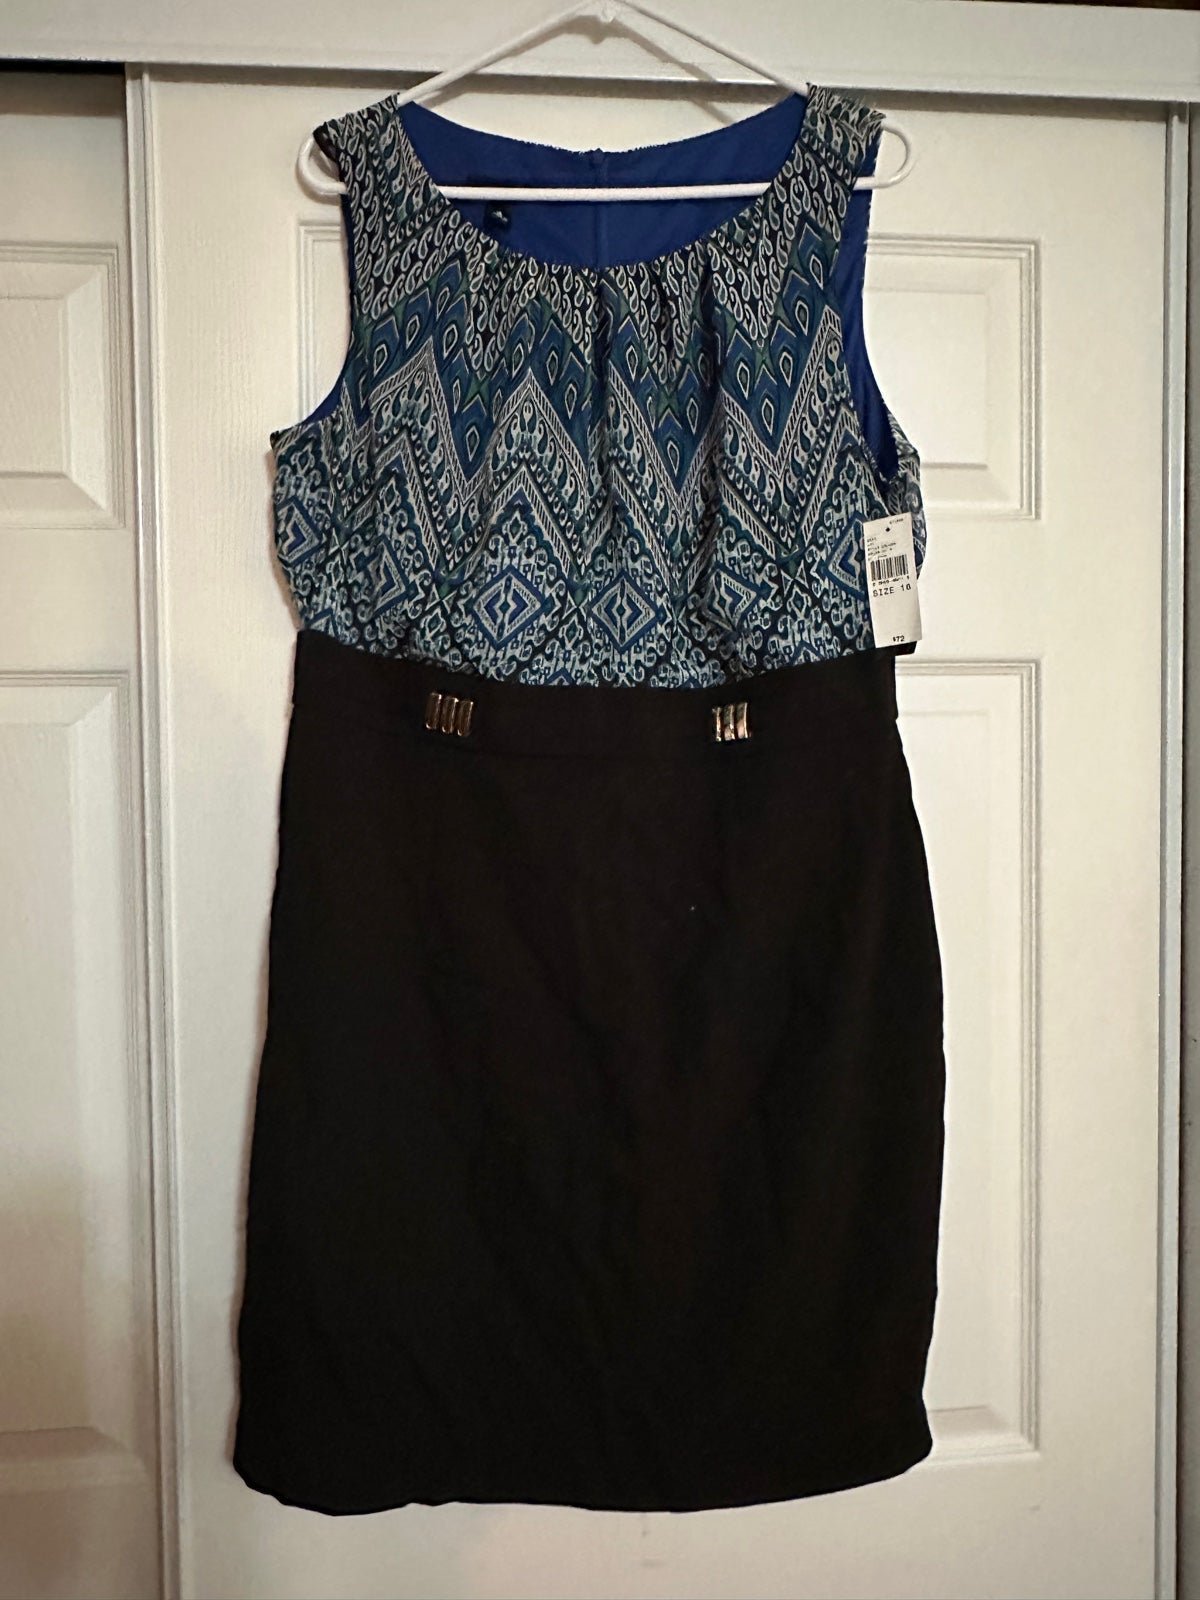 Affordable Womens dress size 16 new with tags o6Omsrik3 Cheap